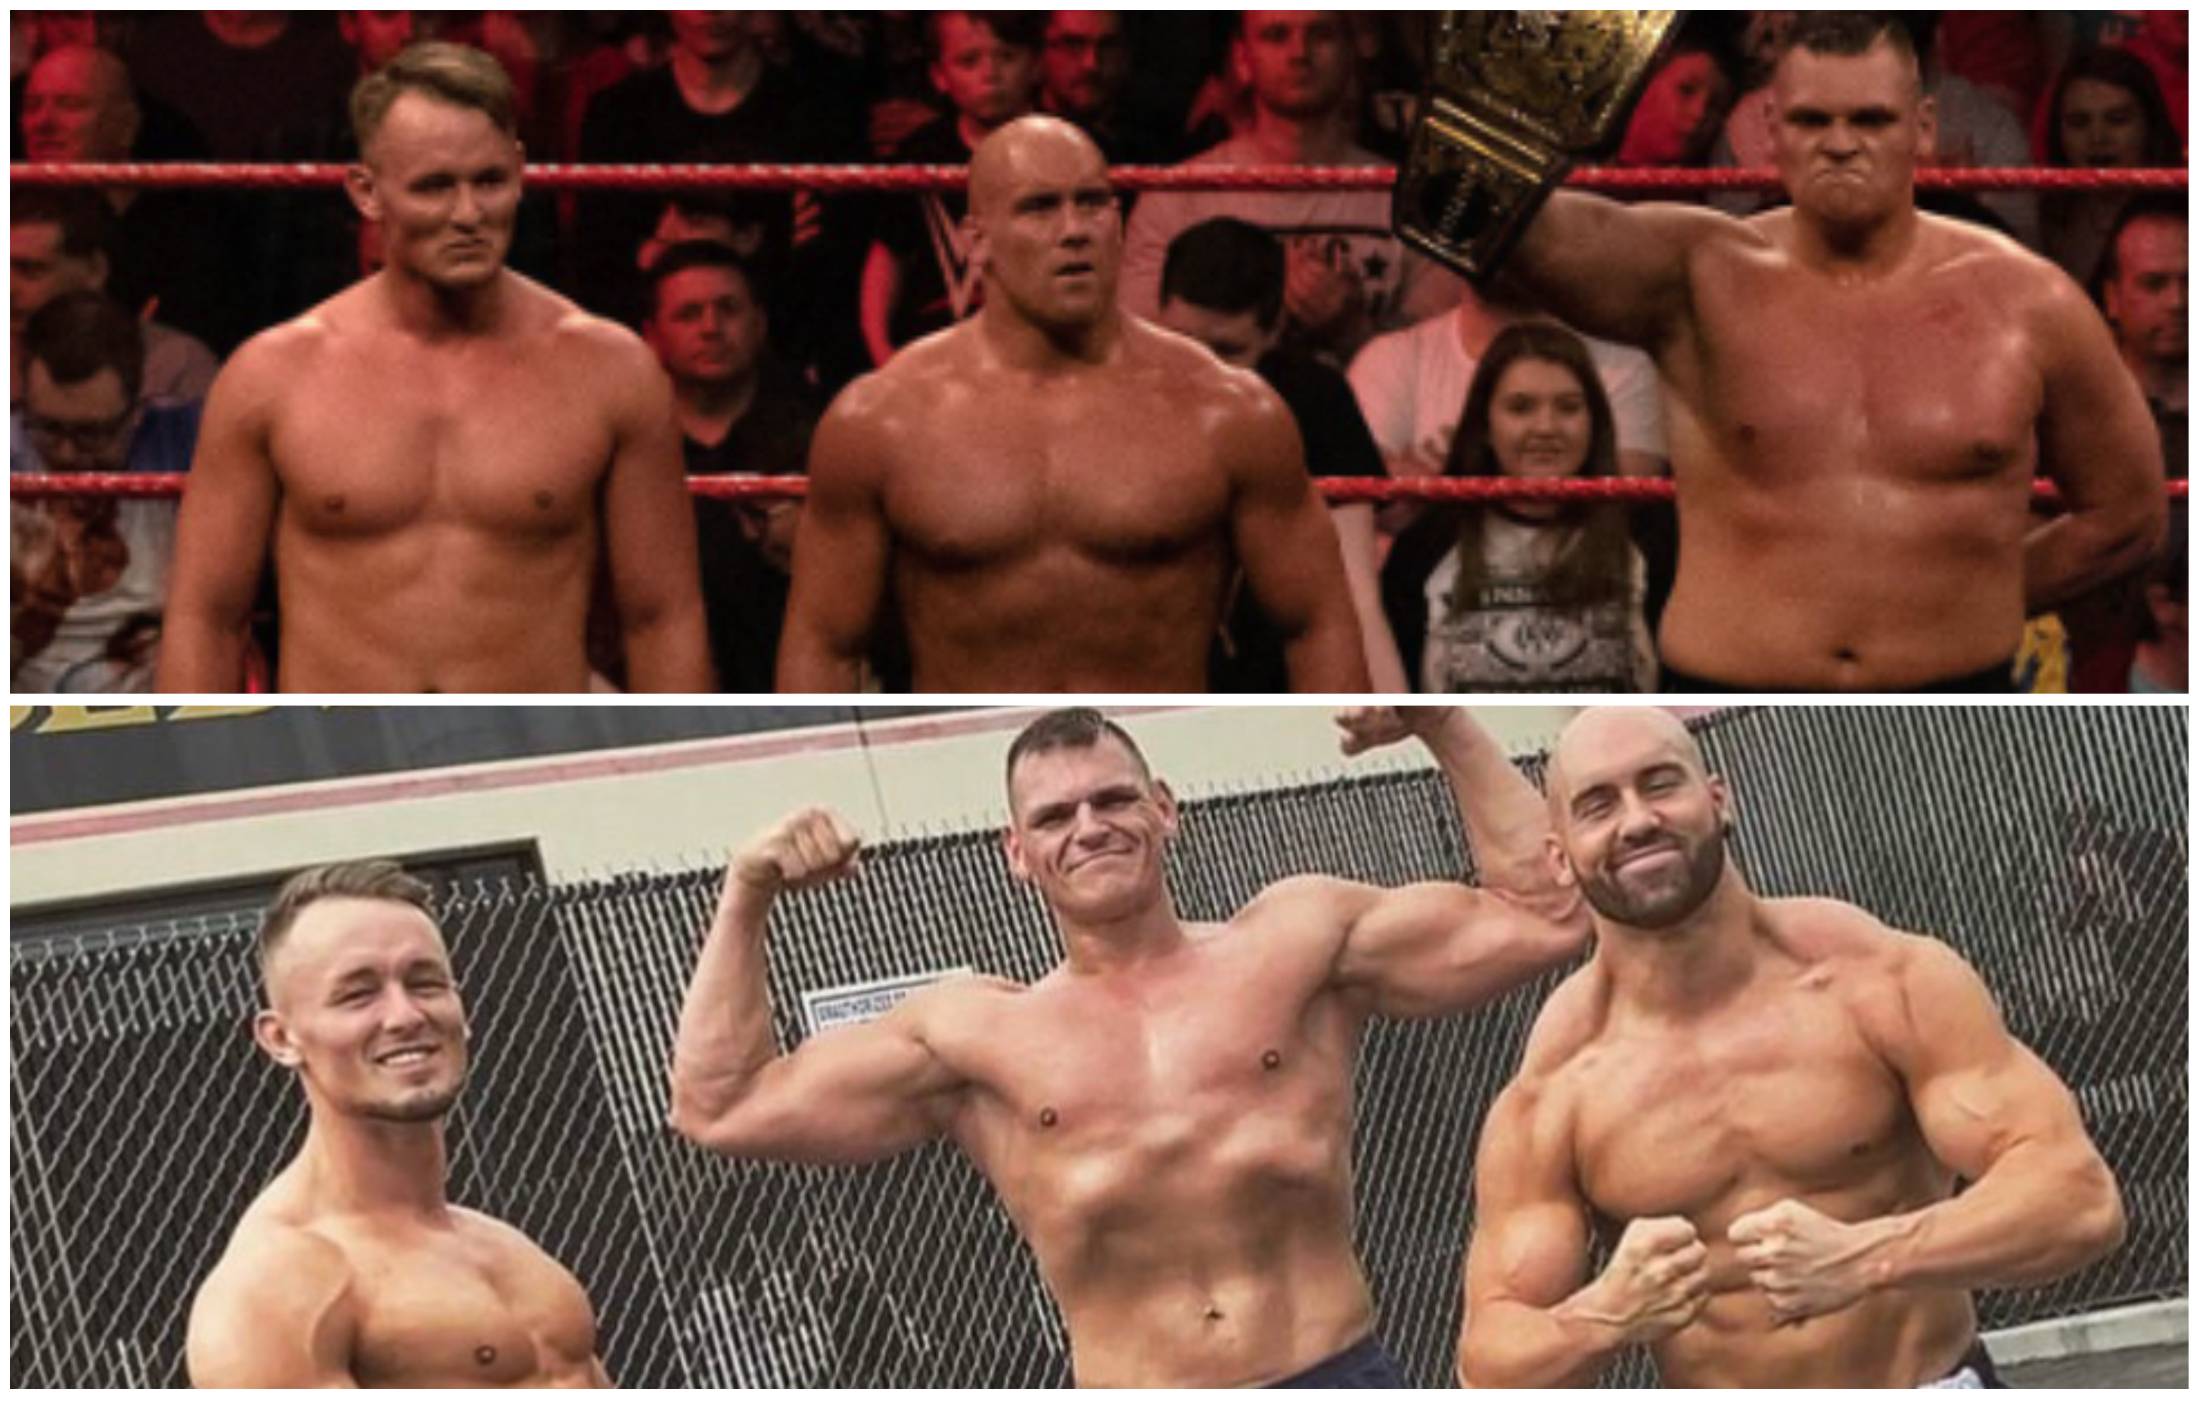 All of Imperium have undergone incredible body transformations